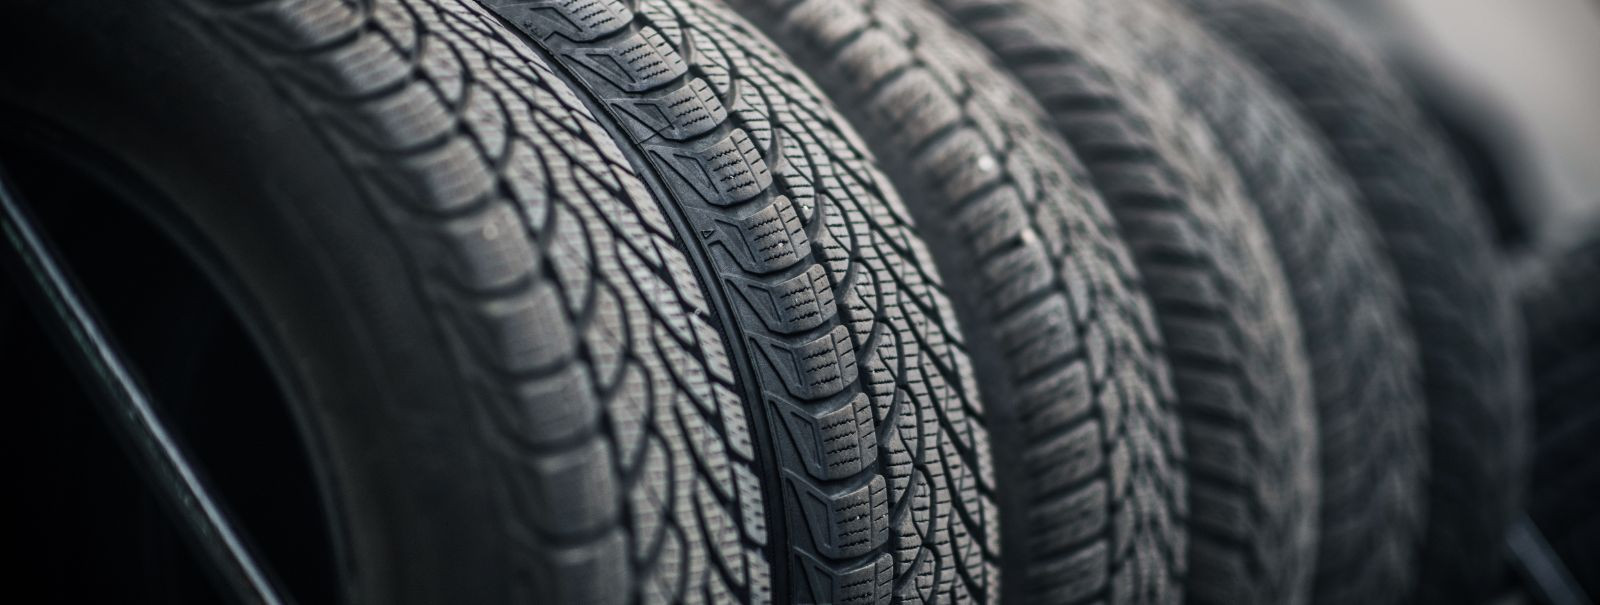 Seasonal tyre changes are not just a recommendation; they are a critical aspect of vehicle maintenance that ensures safety, performance, and efficiency. The rig